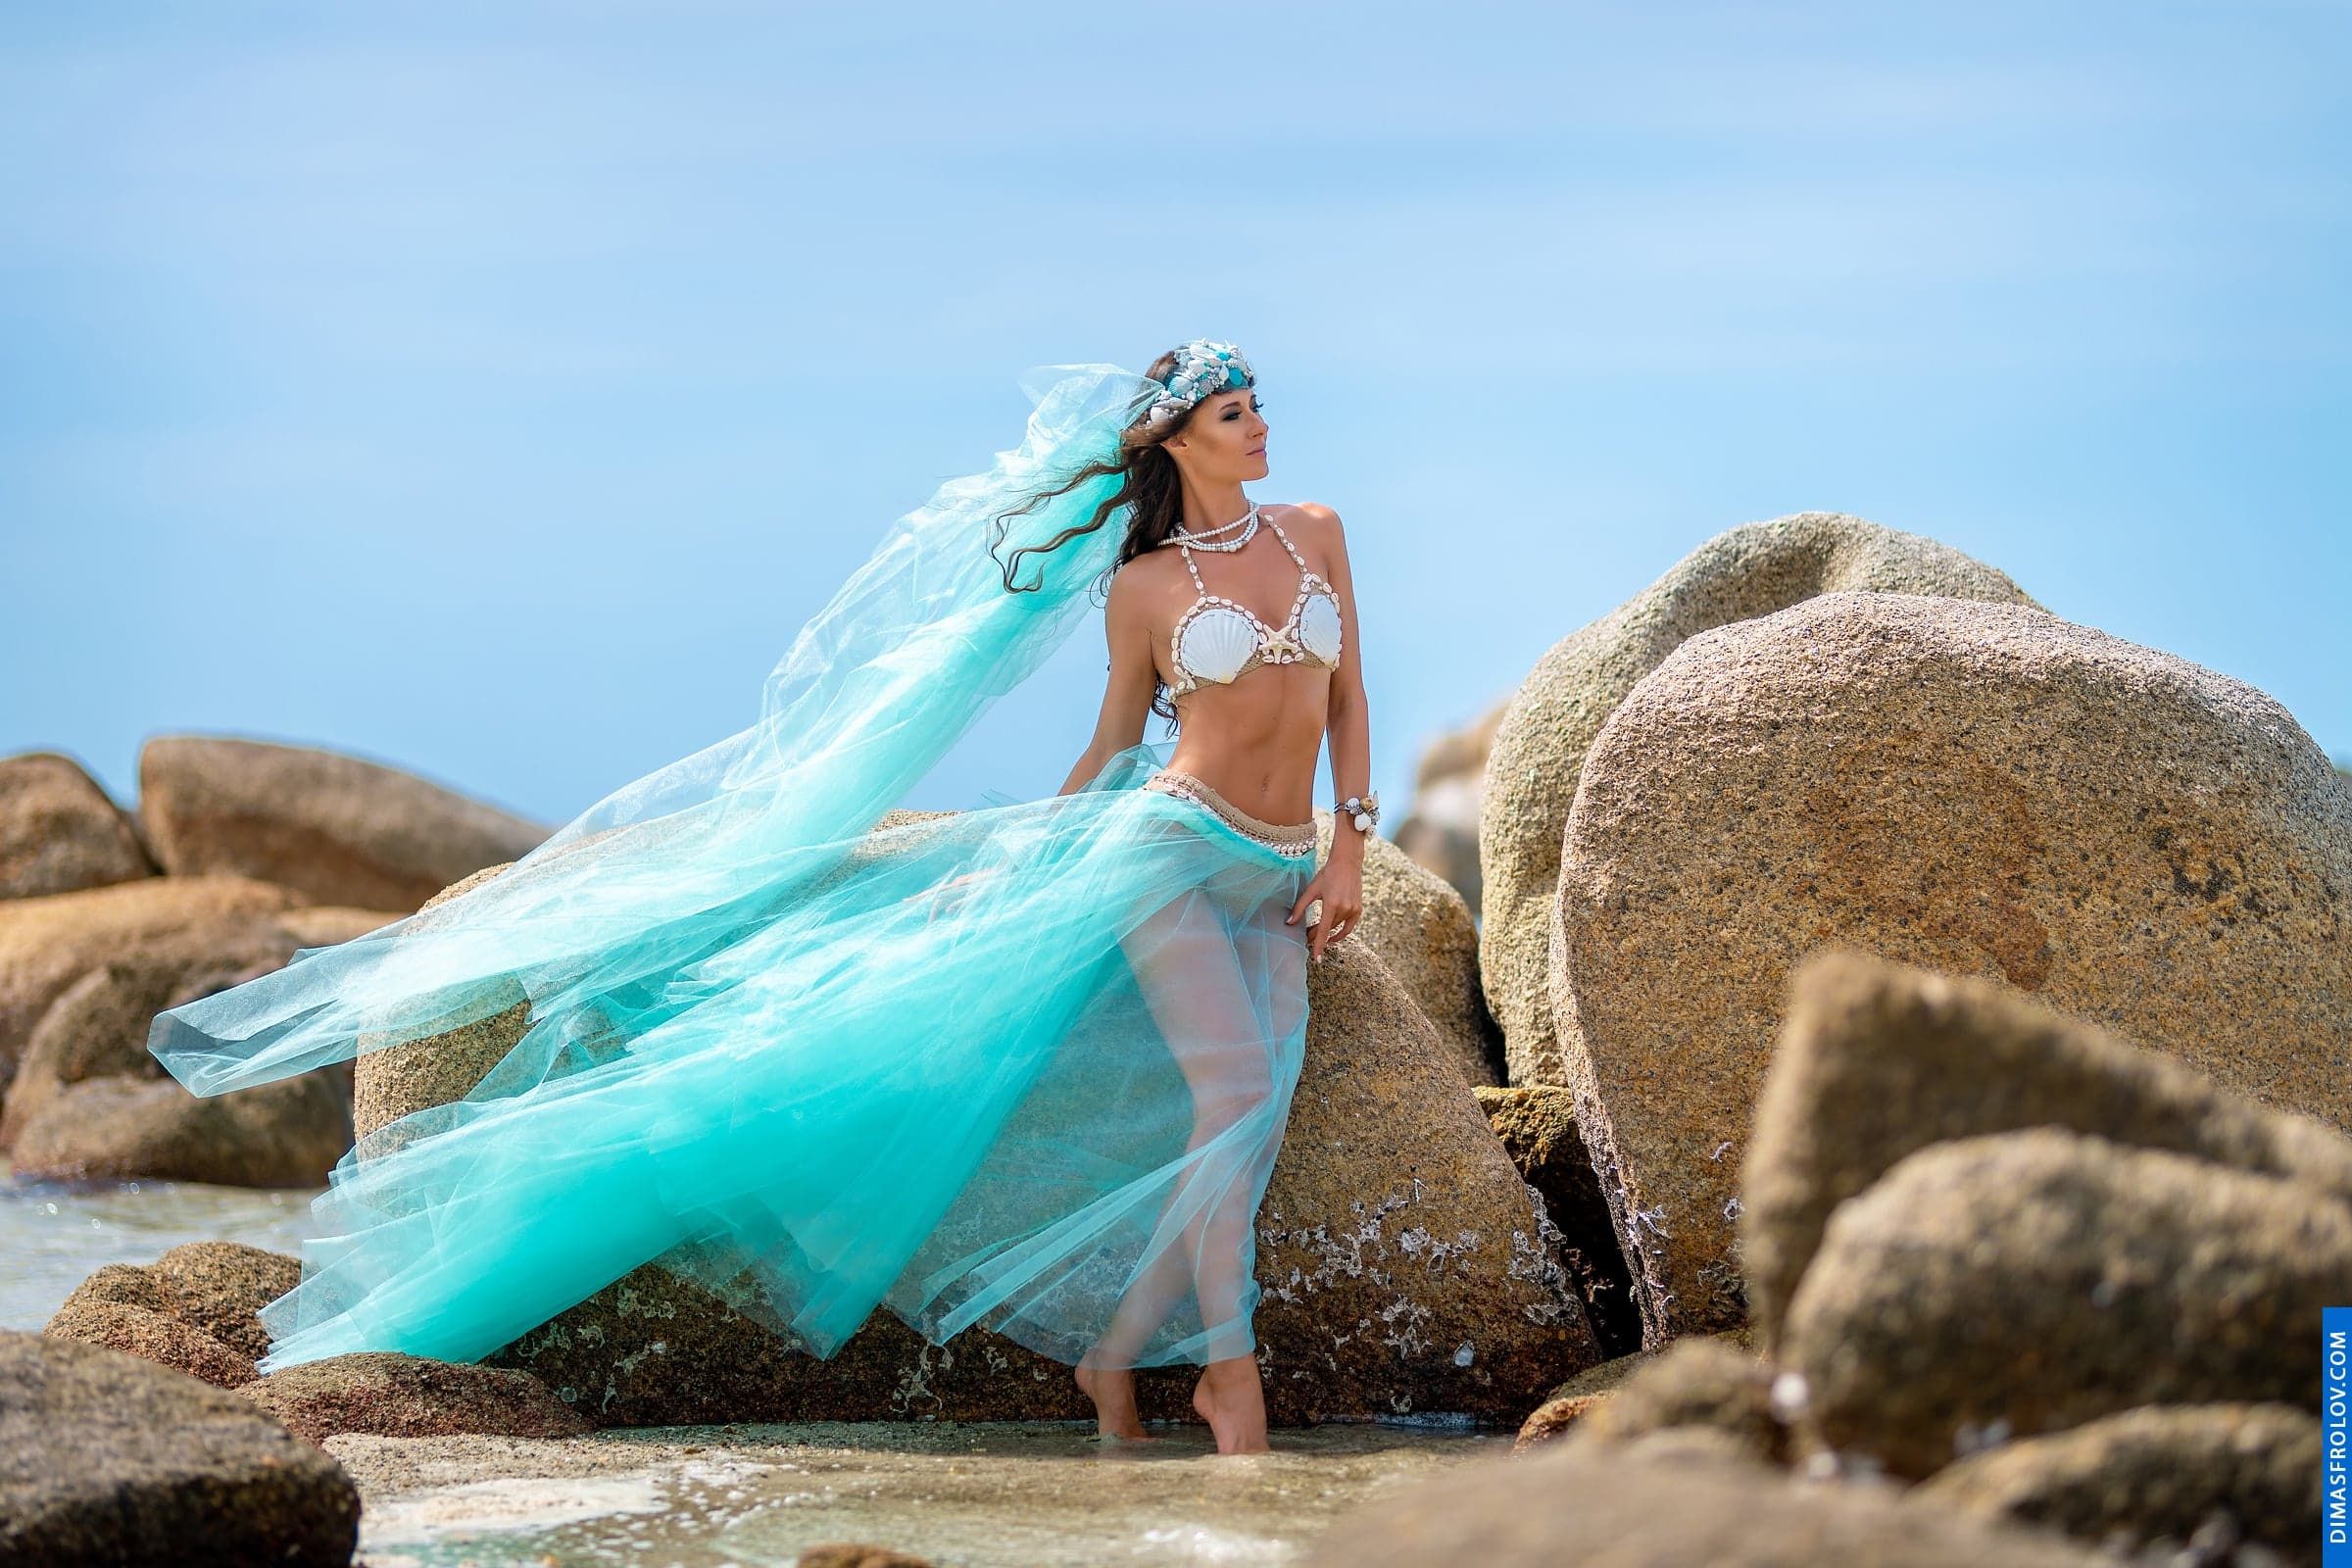 Unique shell accessories for a themed photo shoot on Koh Samui. photographer Dimas Frolov. photo1612